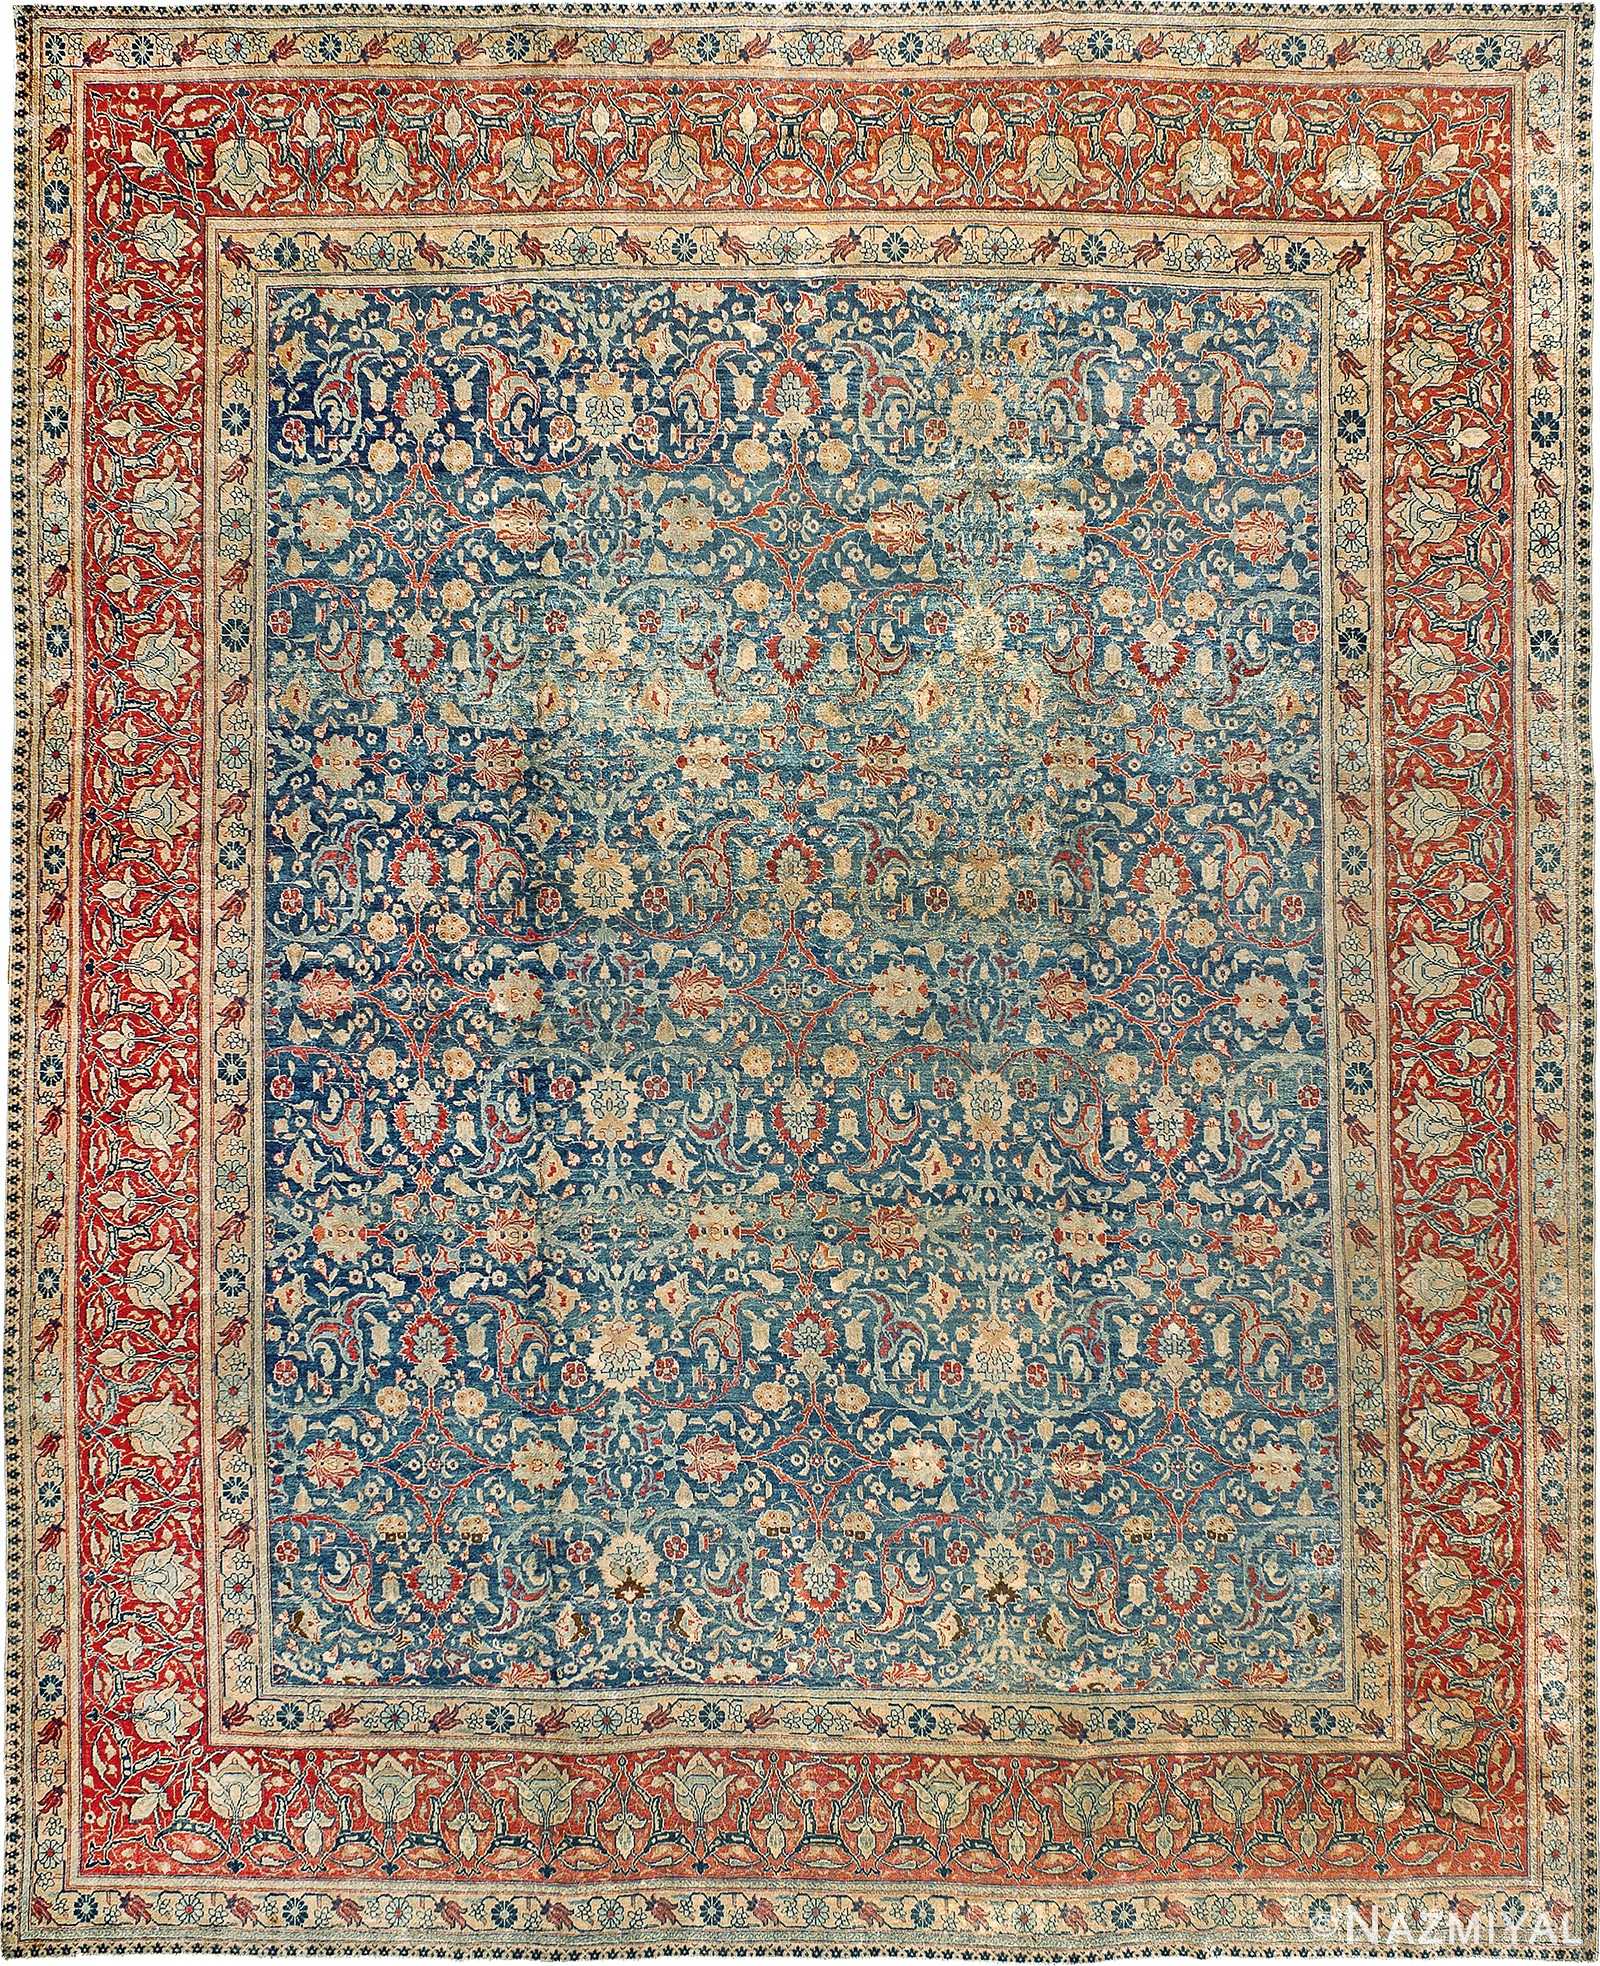 Fine Blue Antique Persian Room Size Tabriz Rug #90024 by Nazmiyal Antique Rugs